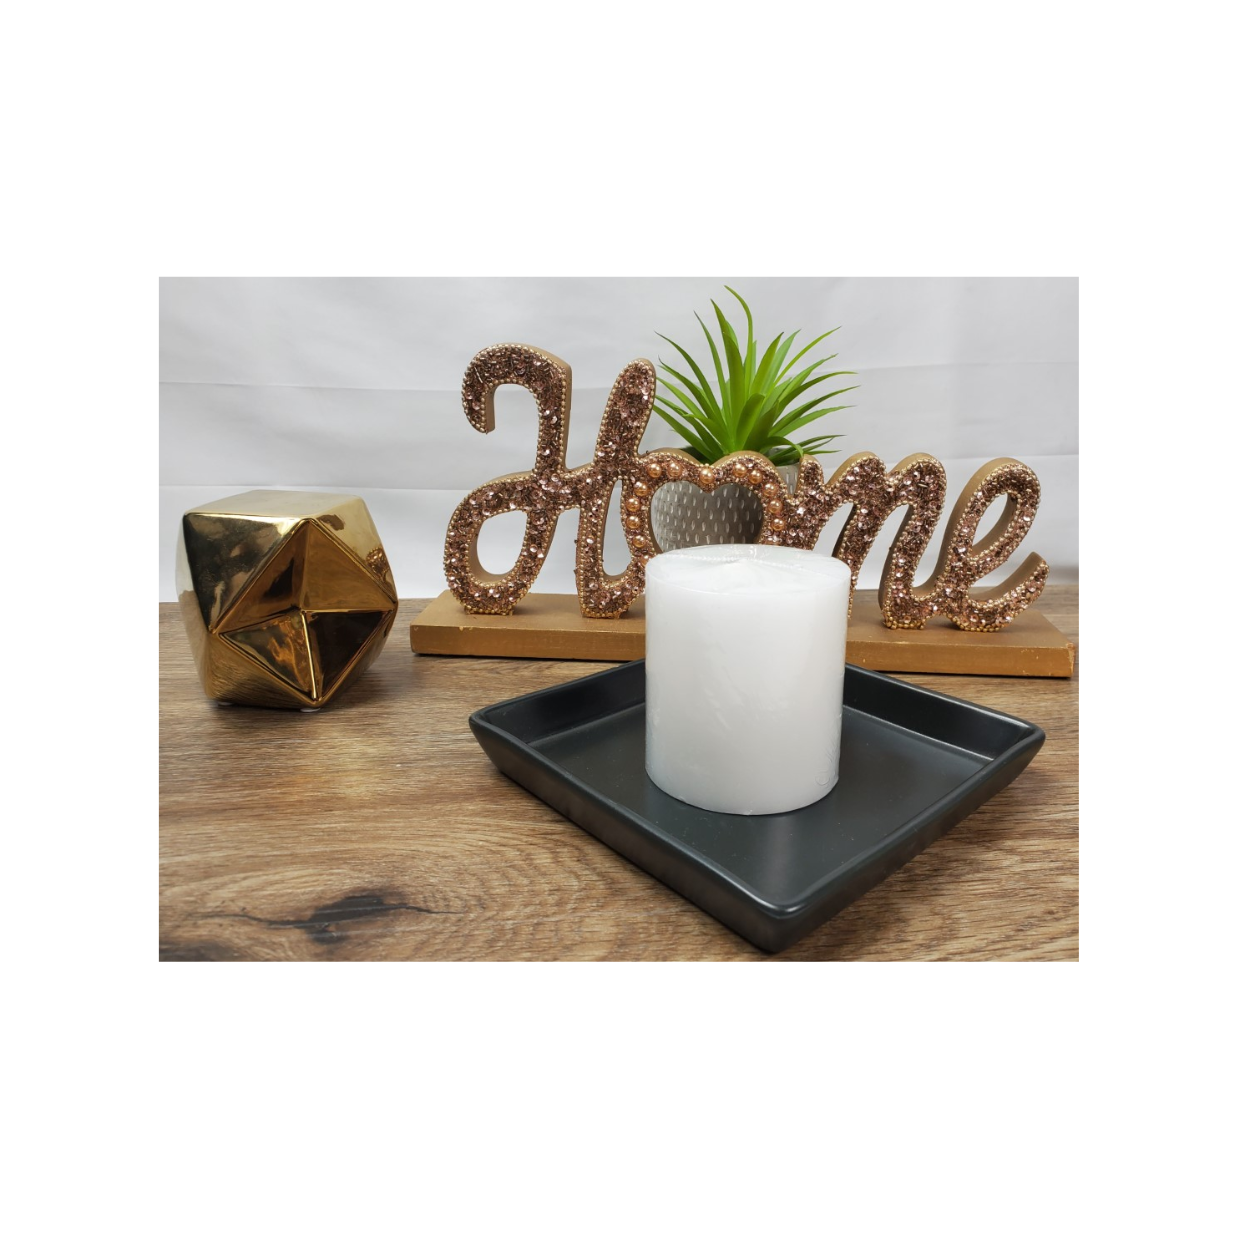 3 x 3 White pillar candle in a tray fireside collection